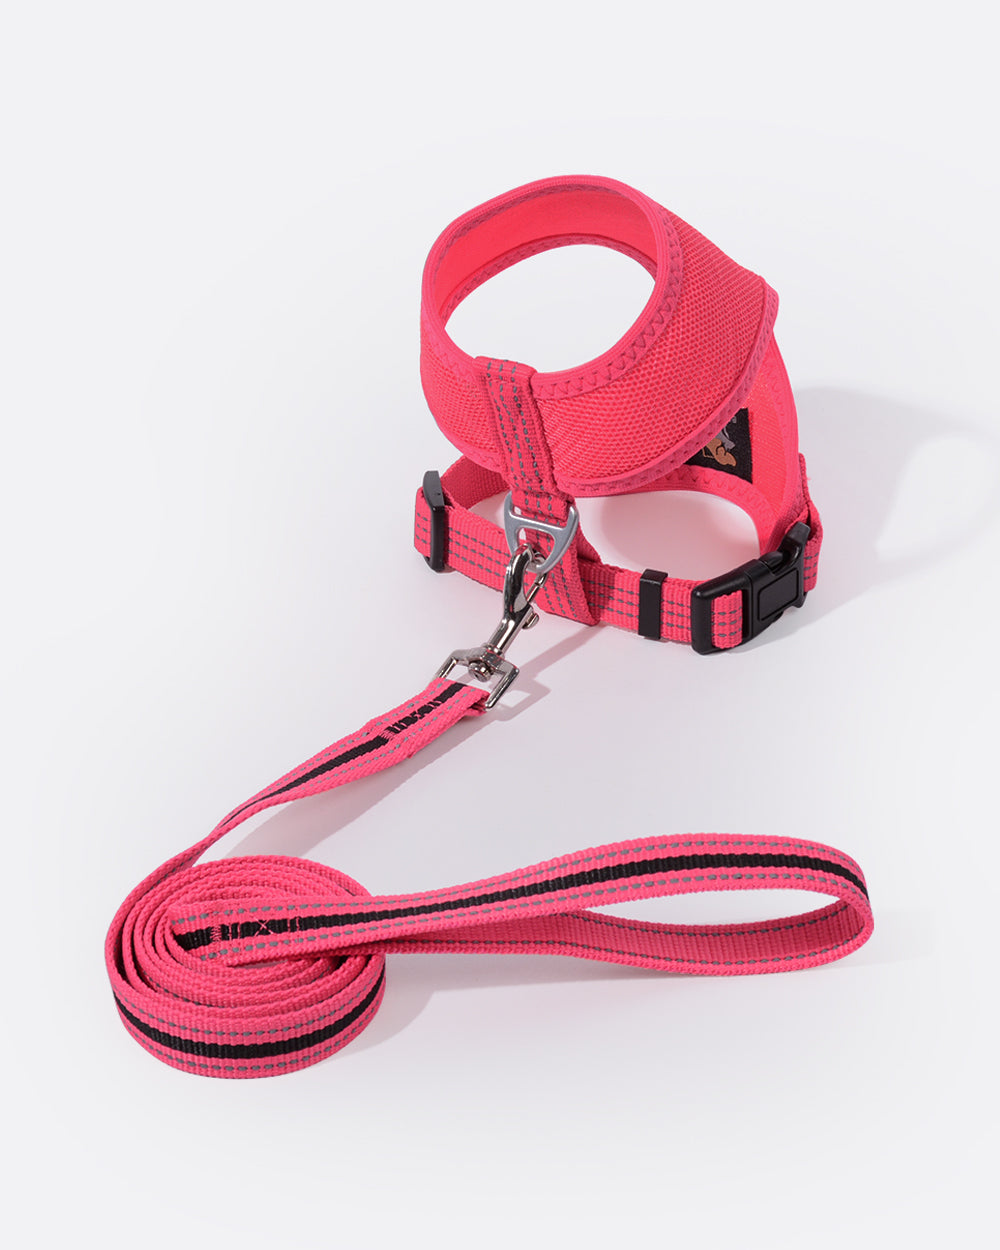 Simply Soft Harness and Leash Set - Rose Pink